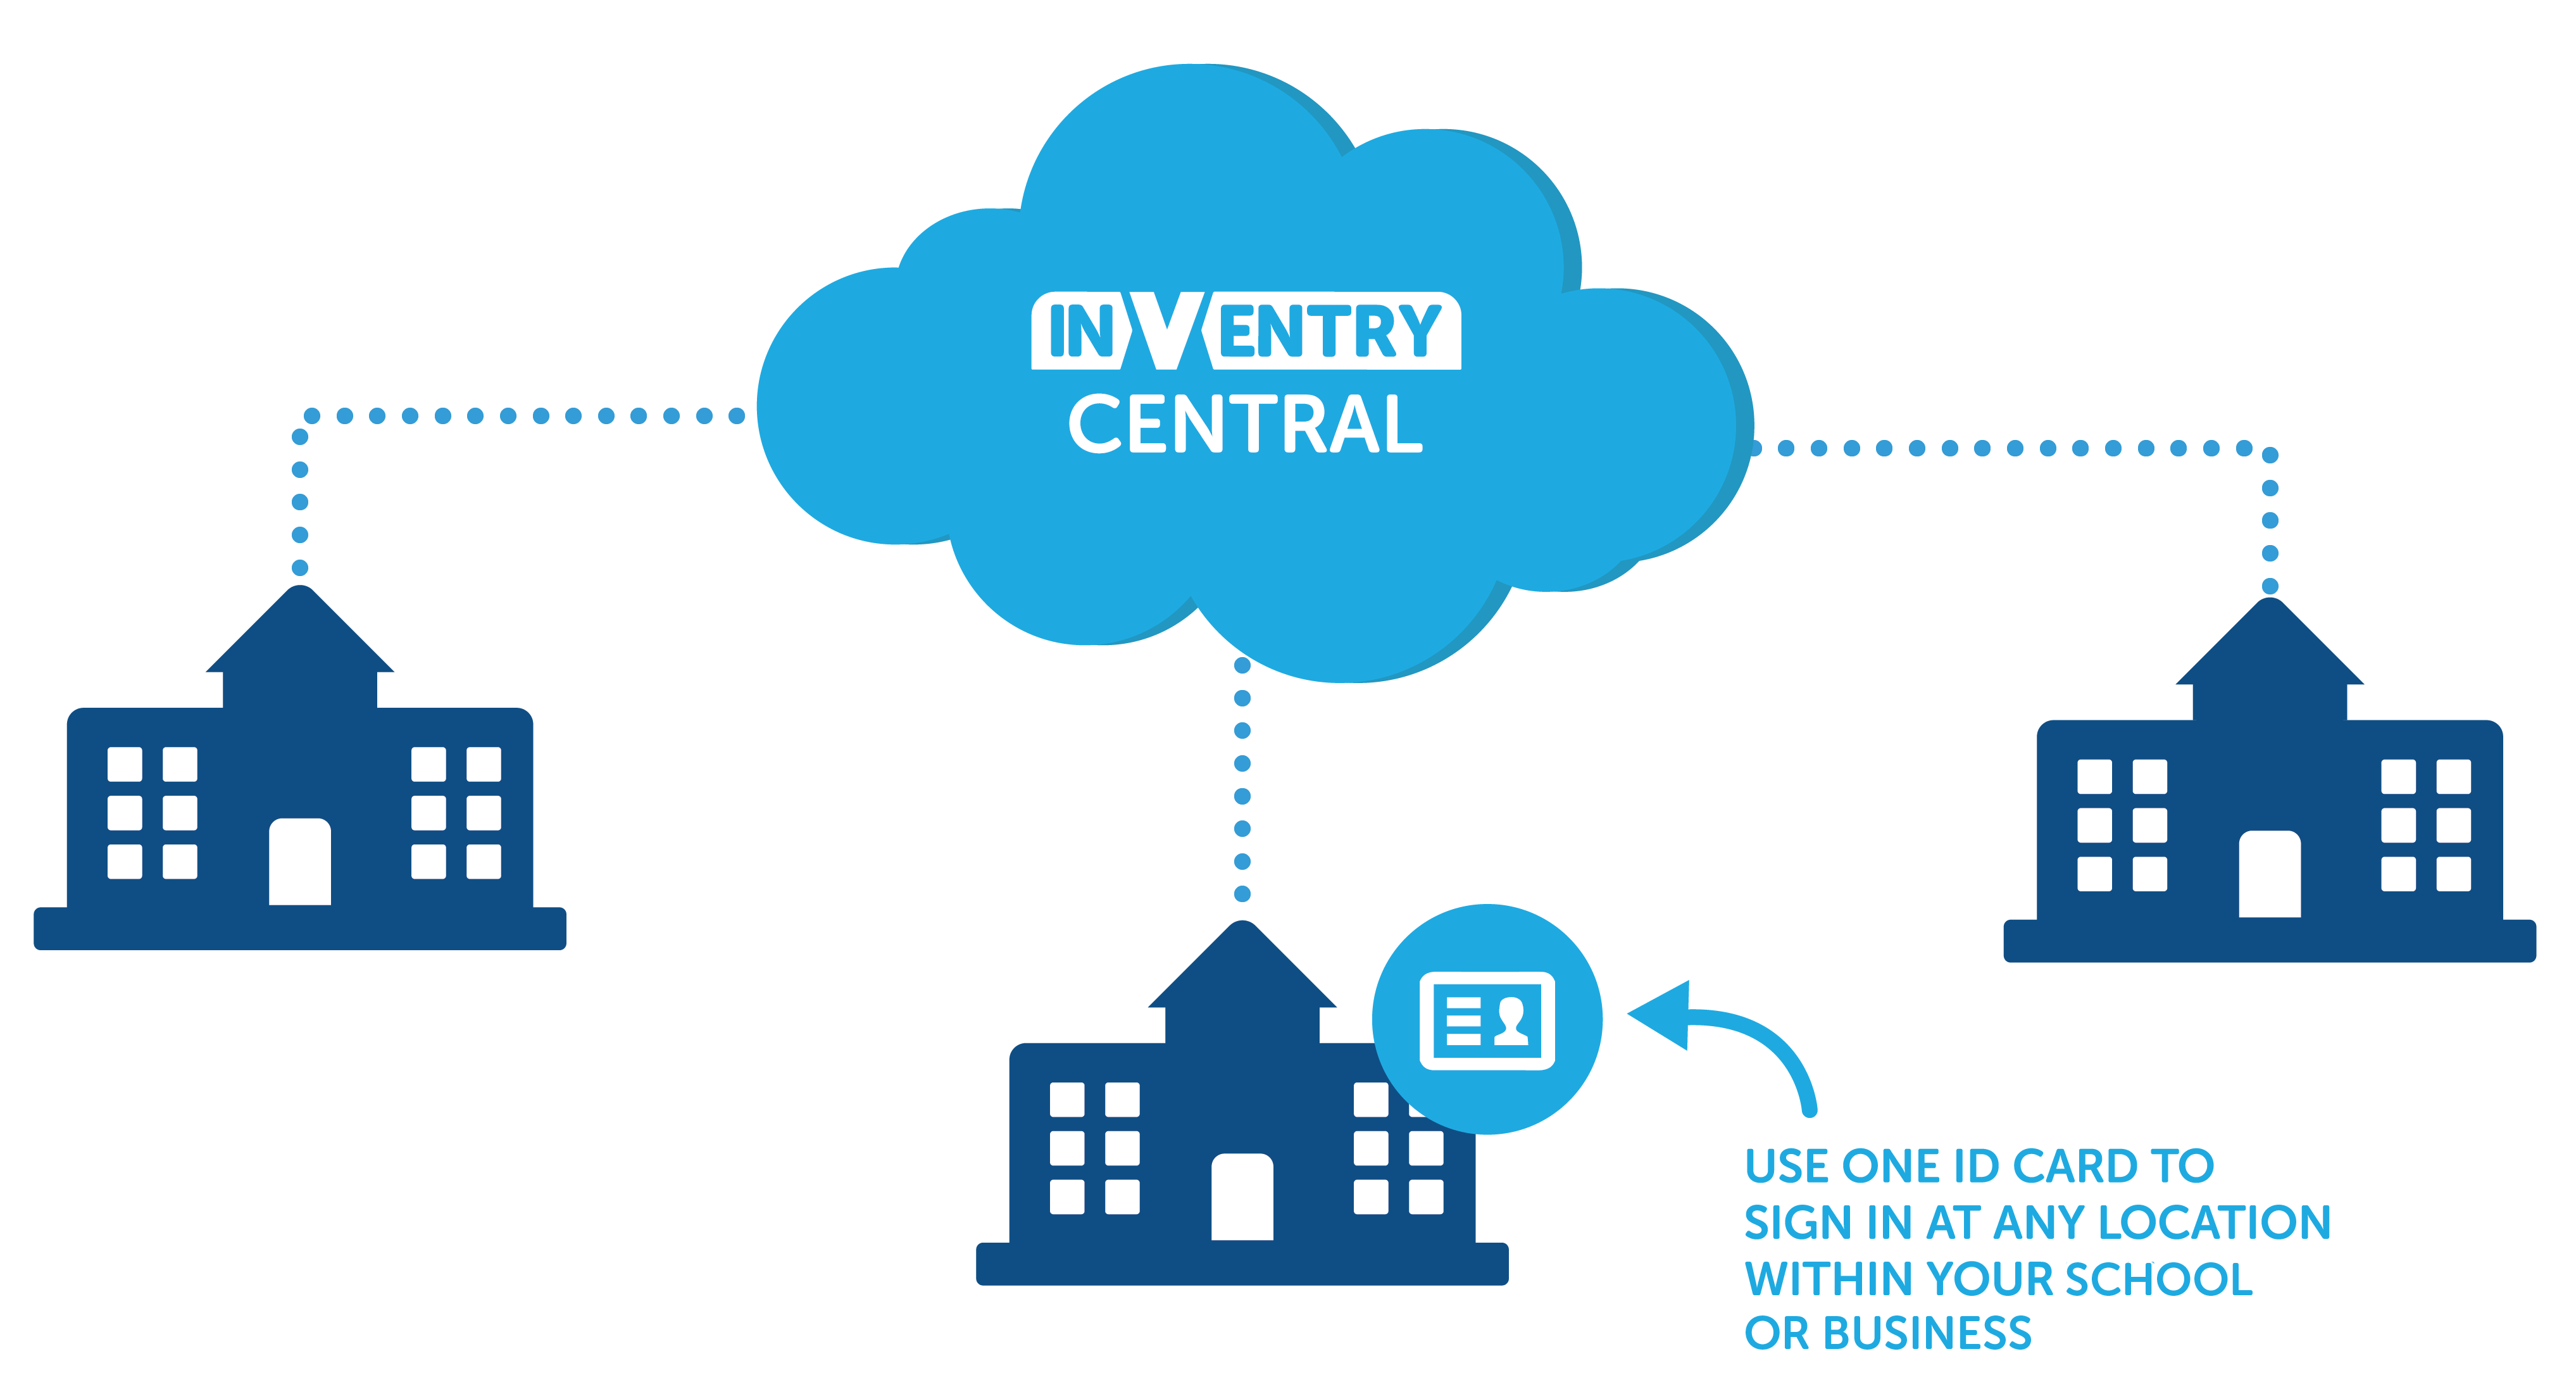 InVentry Central